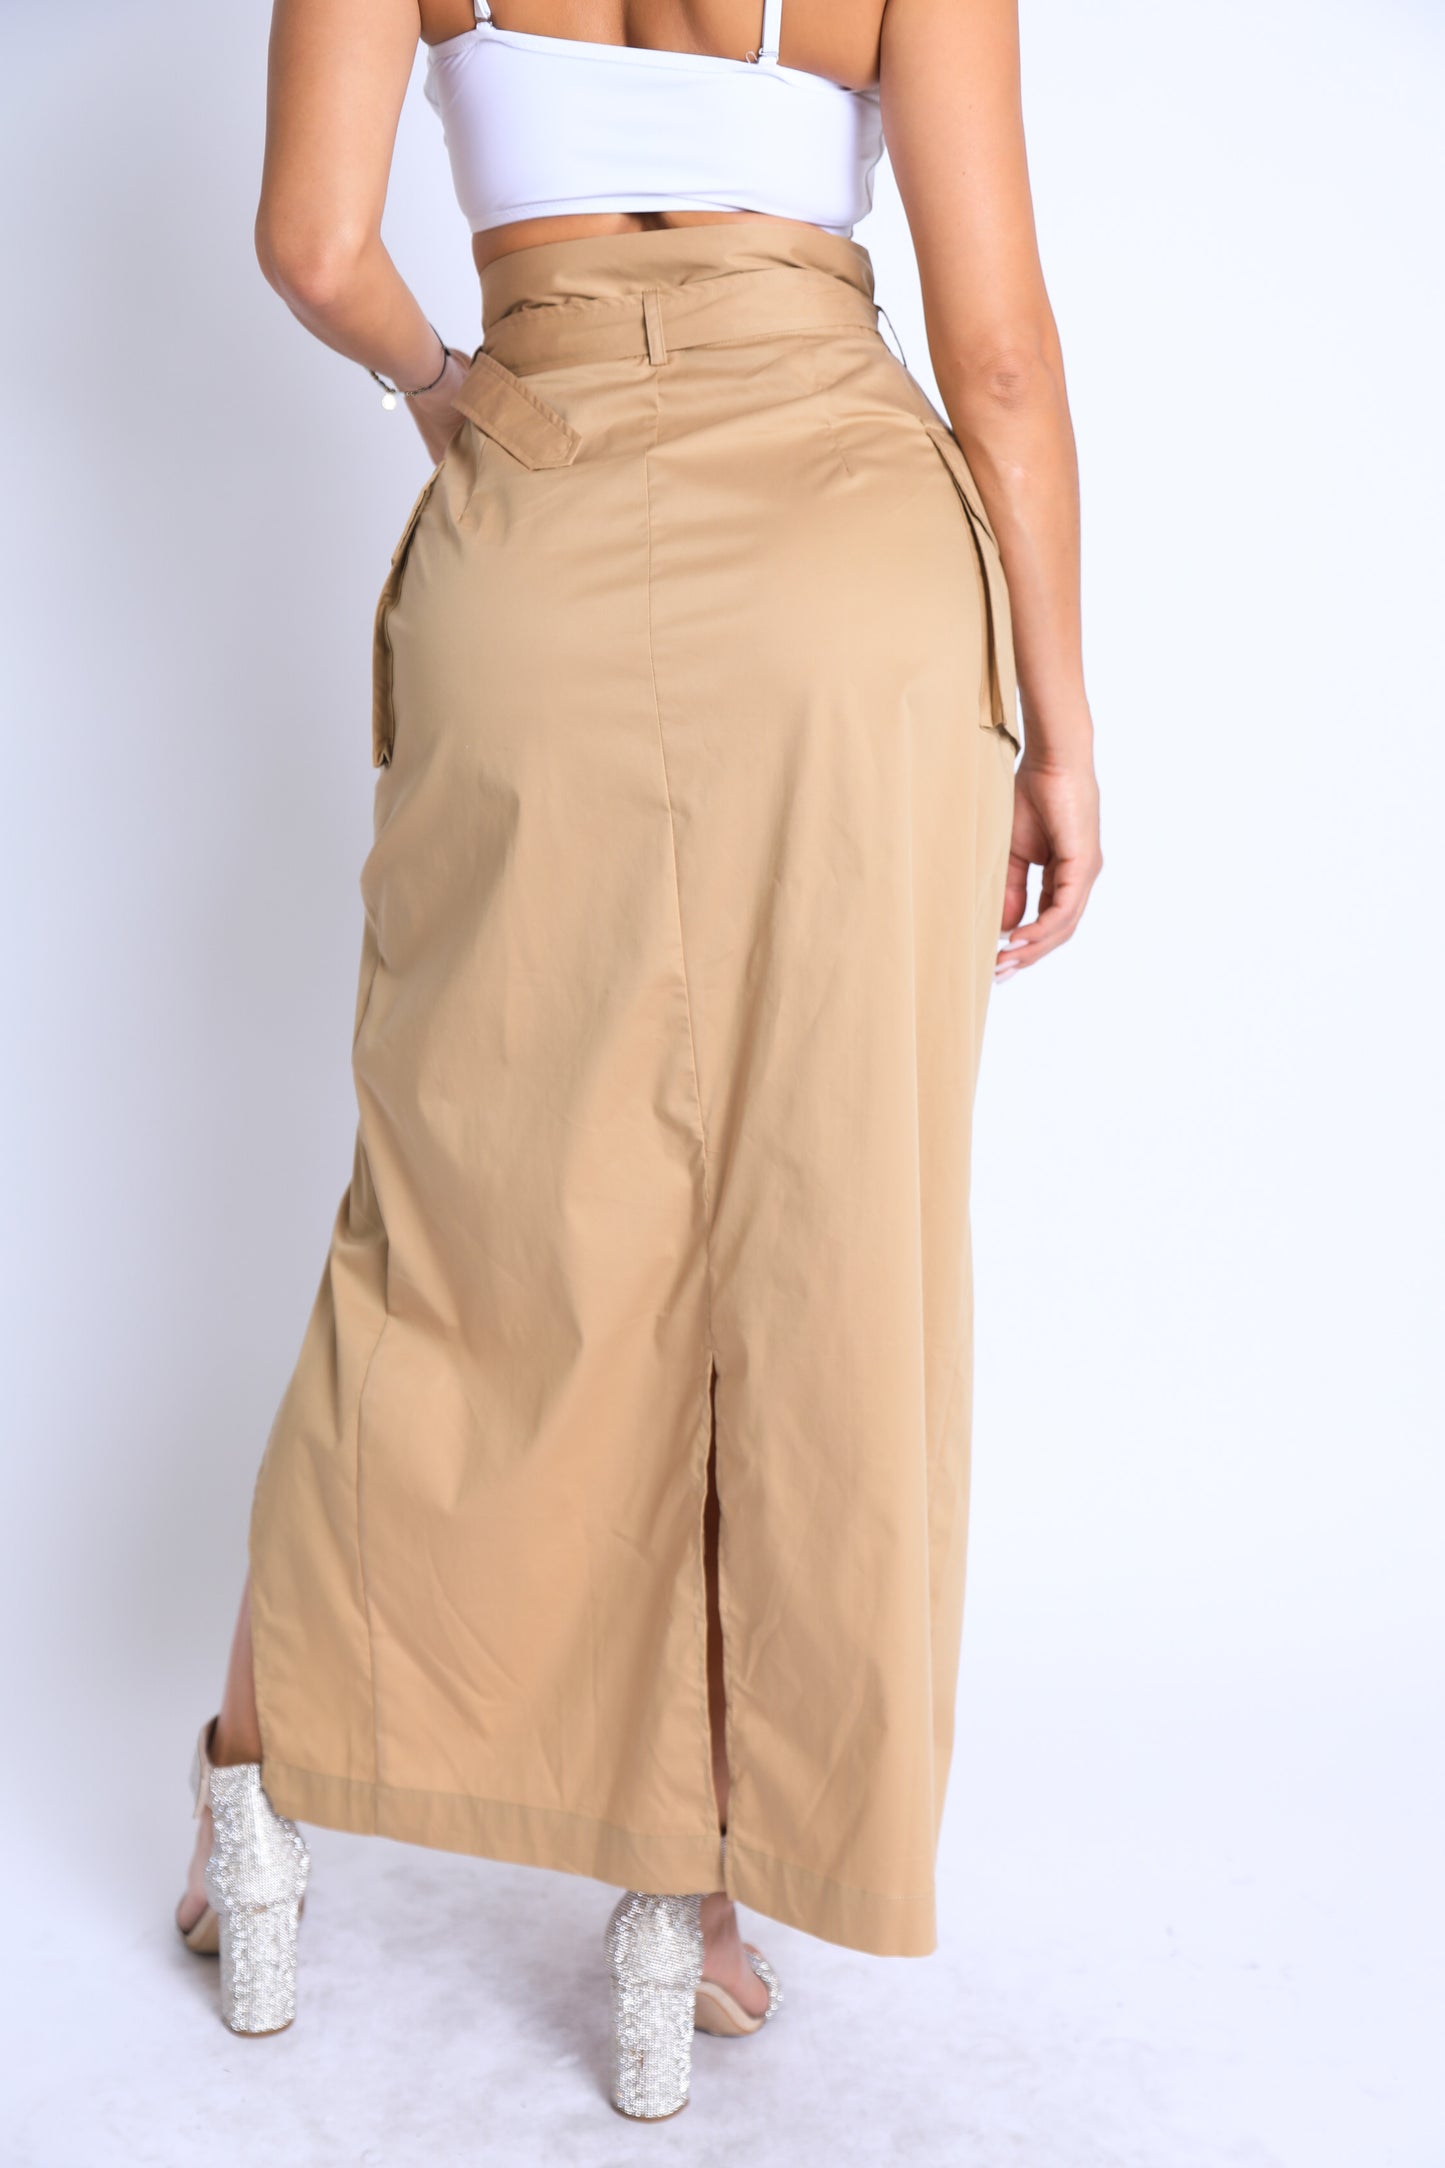 Asymmetric Self Belted Pockets Detailed Maxi Skirt Formal Casual